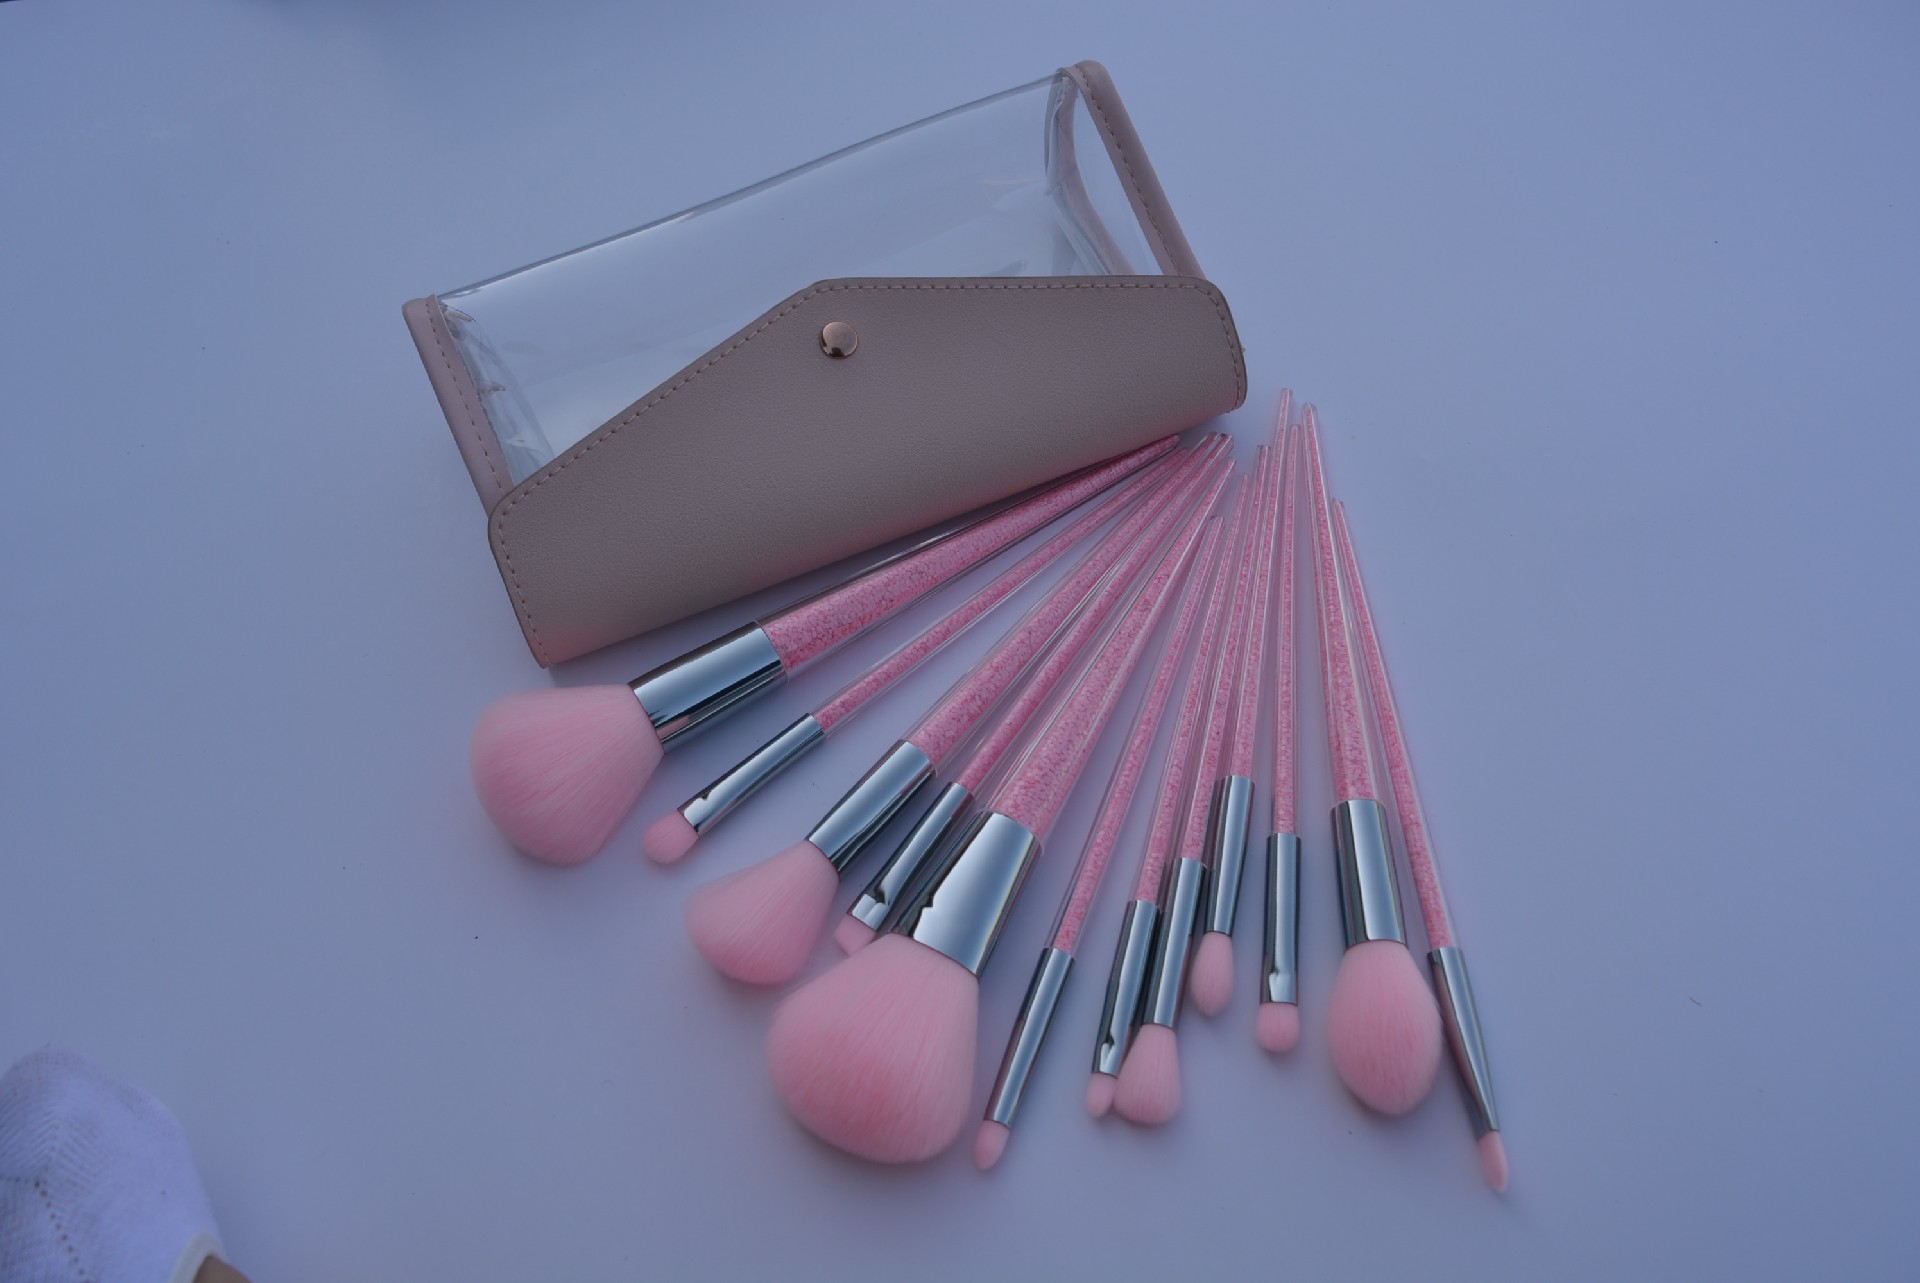 12pc colorful makeup brushes (7).JPG